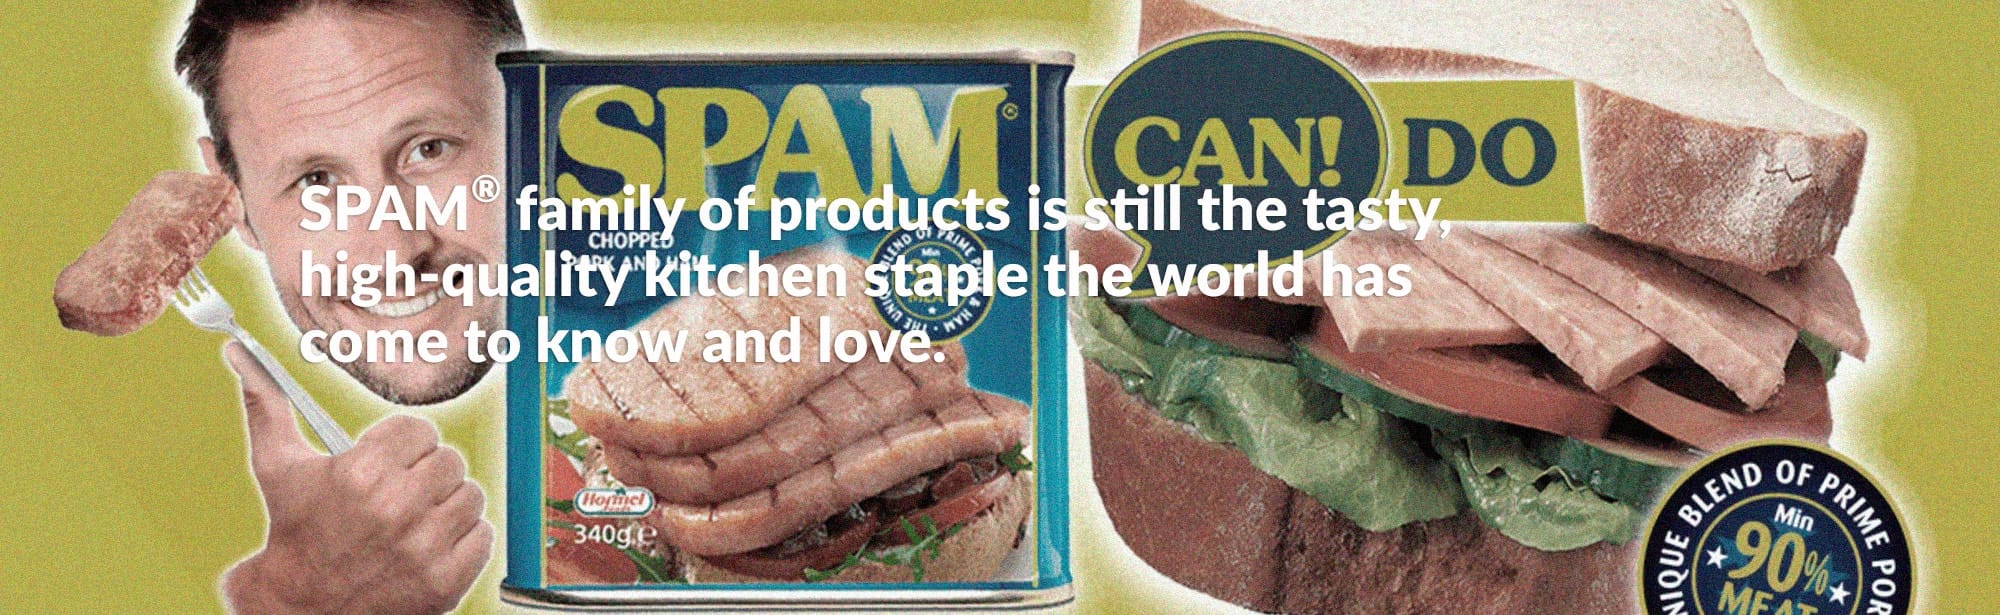 Spam Featured Image